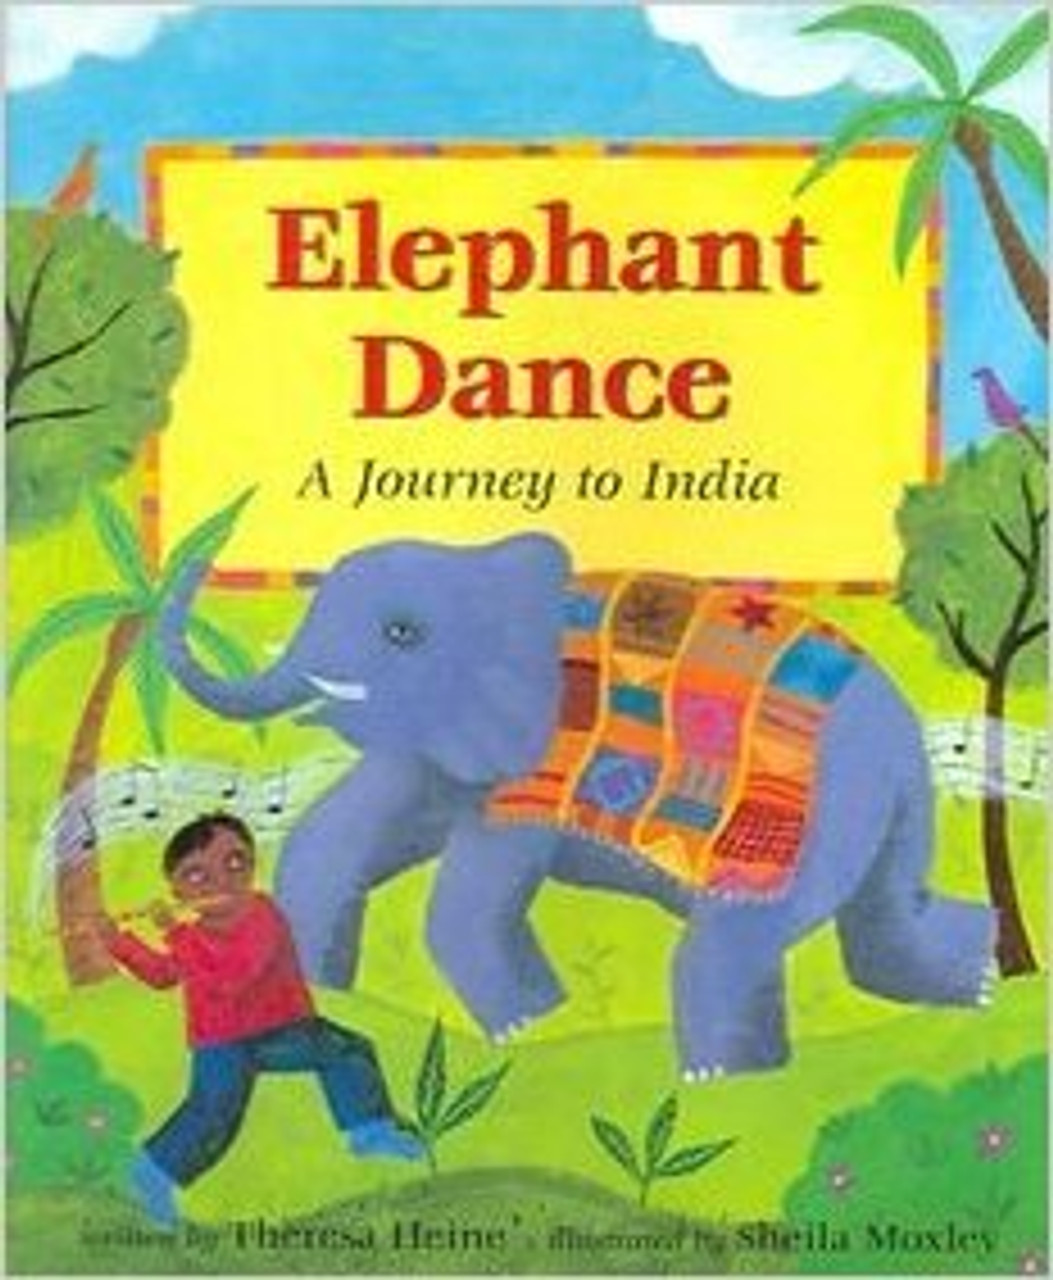 Elephant Dance: Memories of India by Theresa Heine